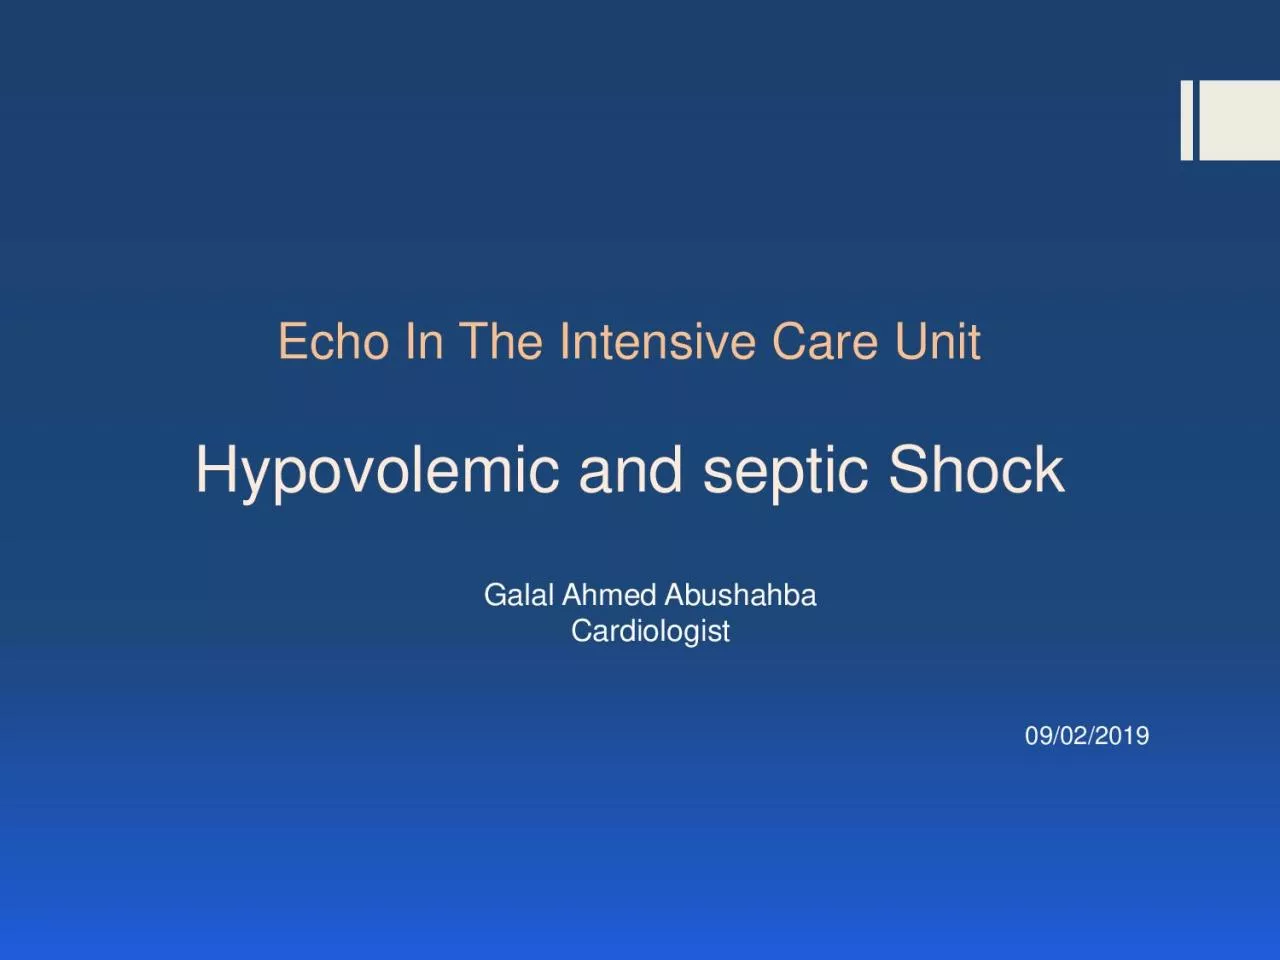 Echo In The Intensive Care Unit